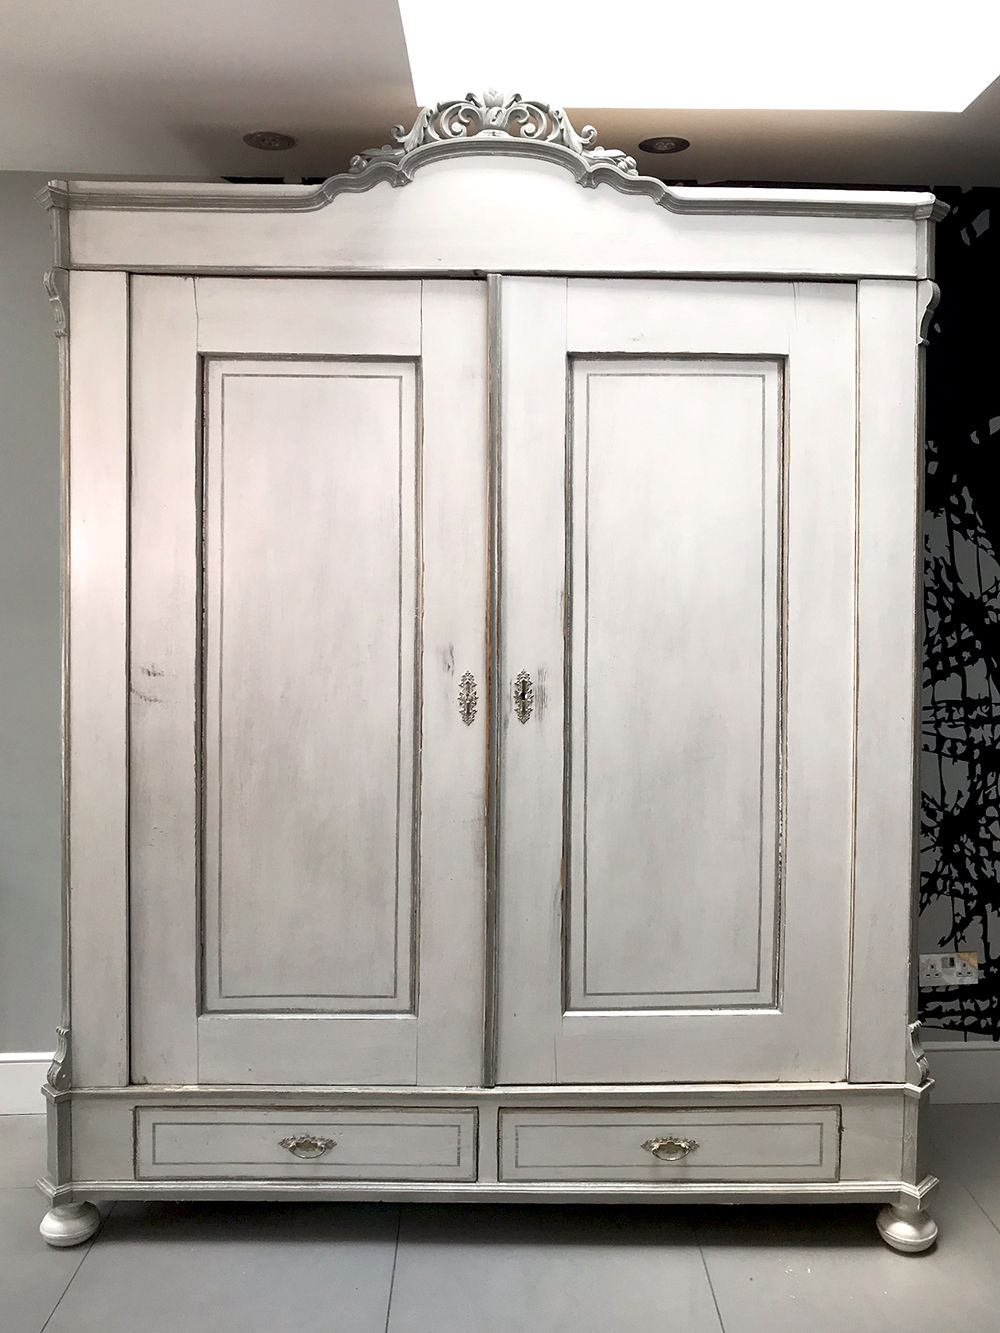 Antique French Painted Armoire – Sold | Napoleonrockefeller – Vintage And  Retro Furniture, Bespoke Hand Crafted Chairs And Seating Inside Vintage French Wardrobes (View 3 of 15)